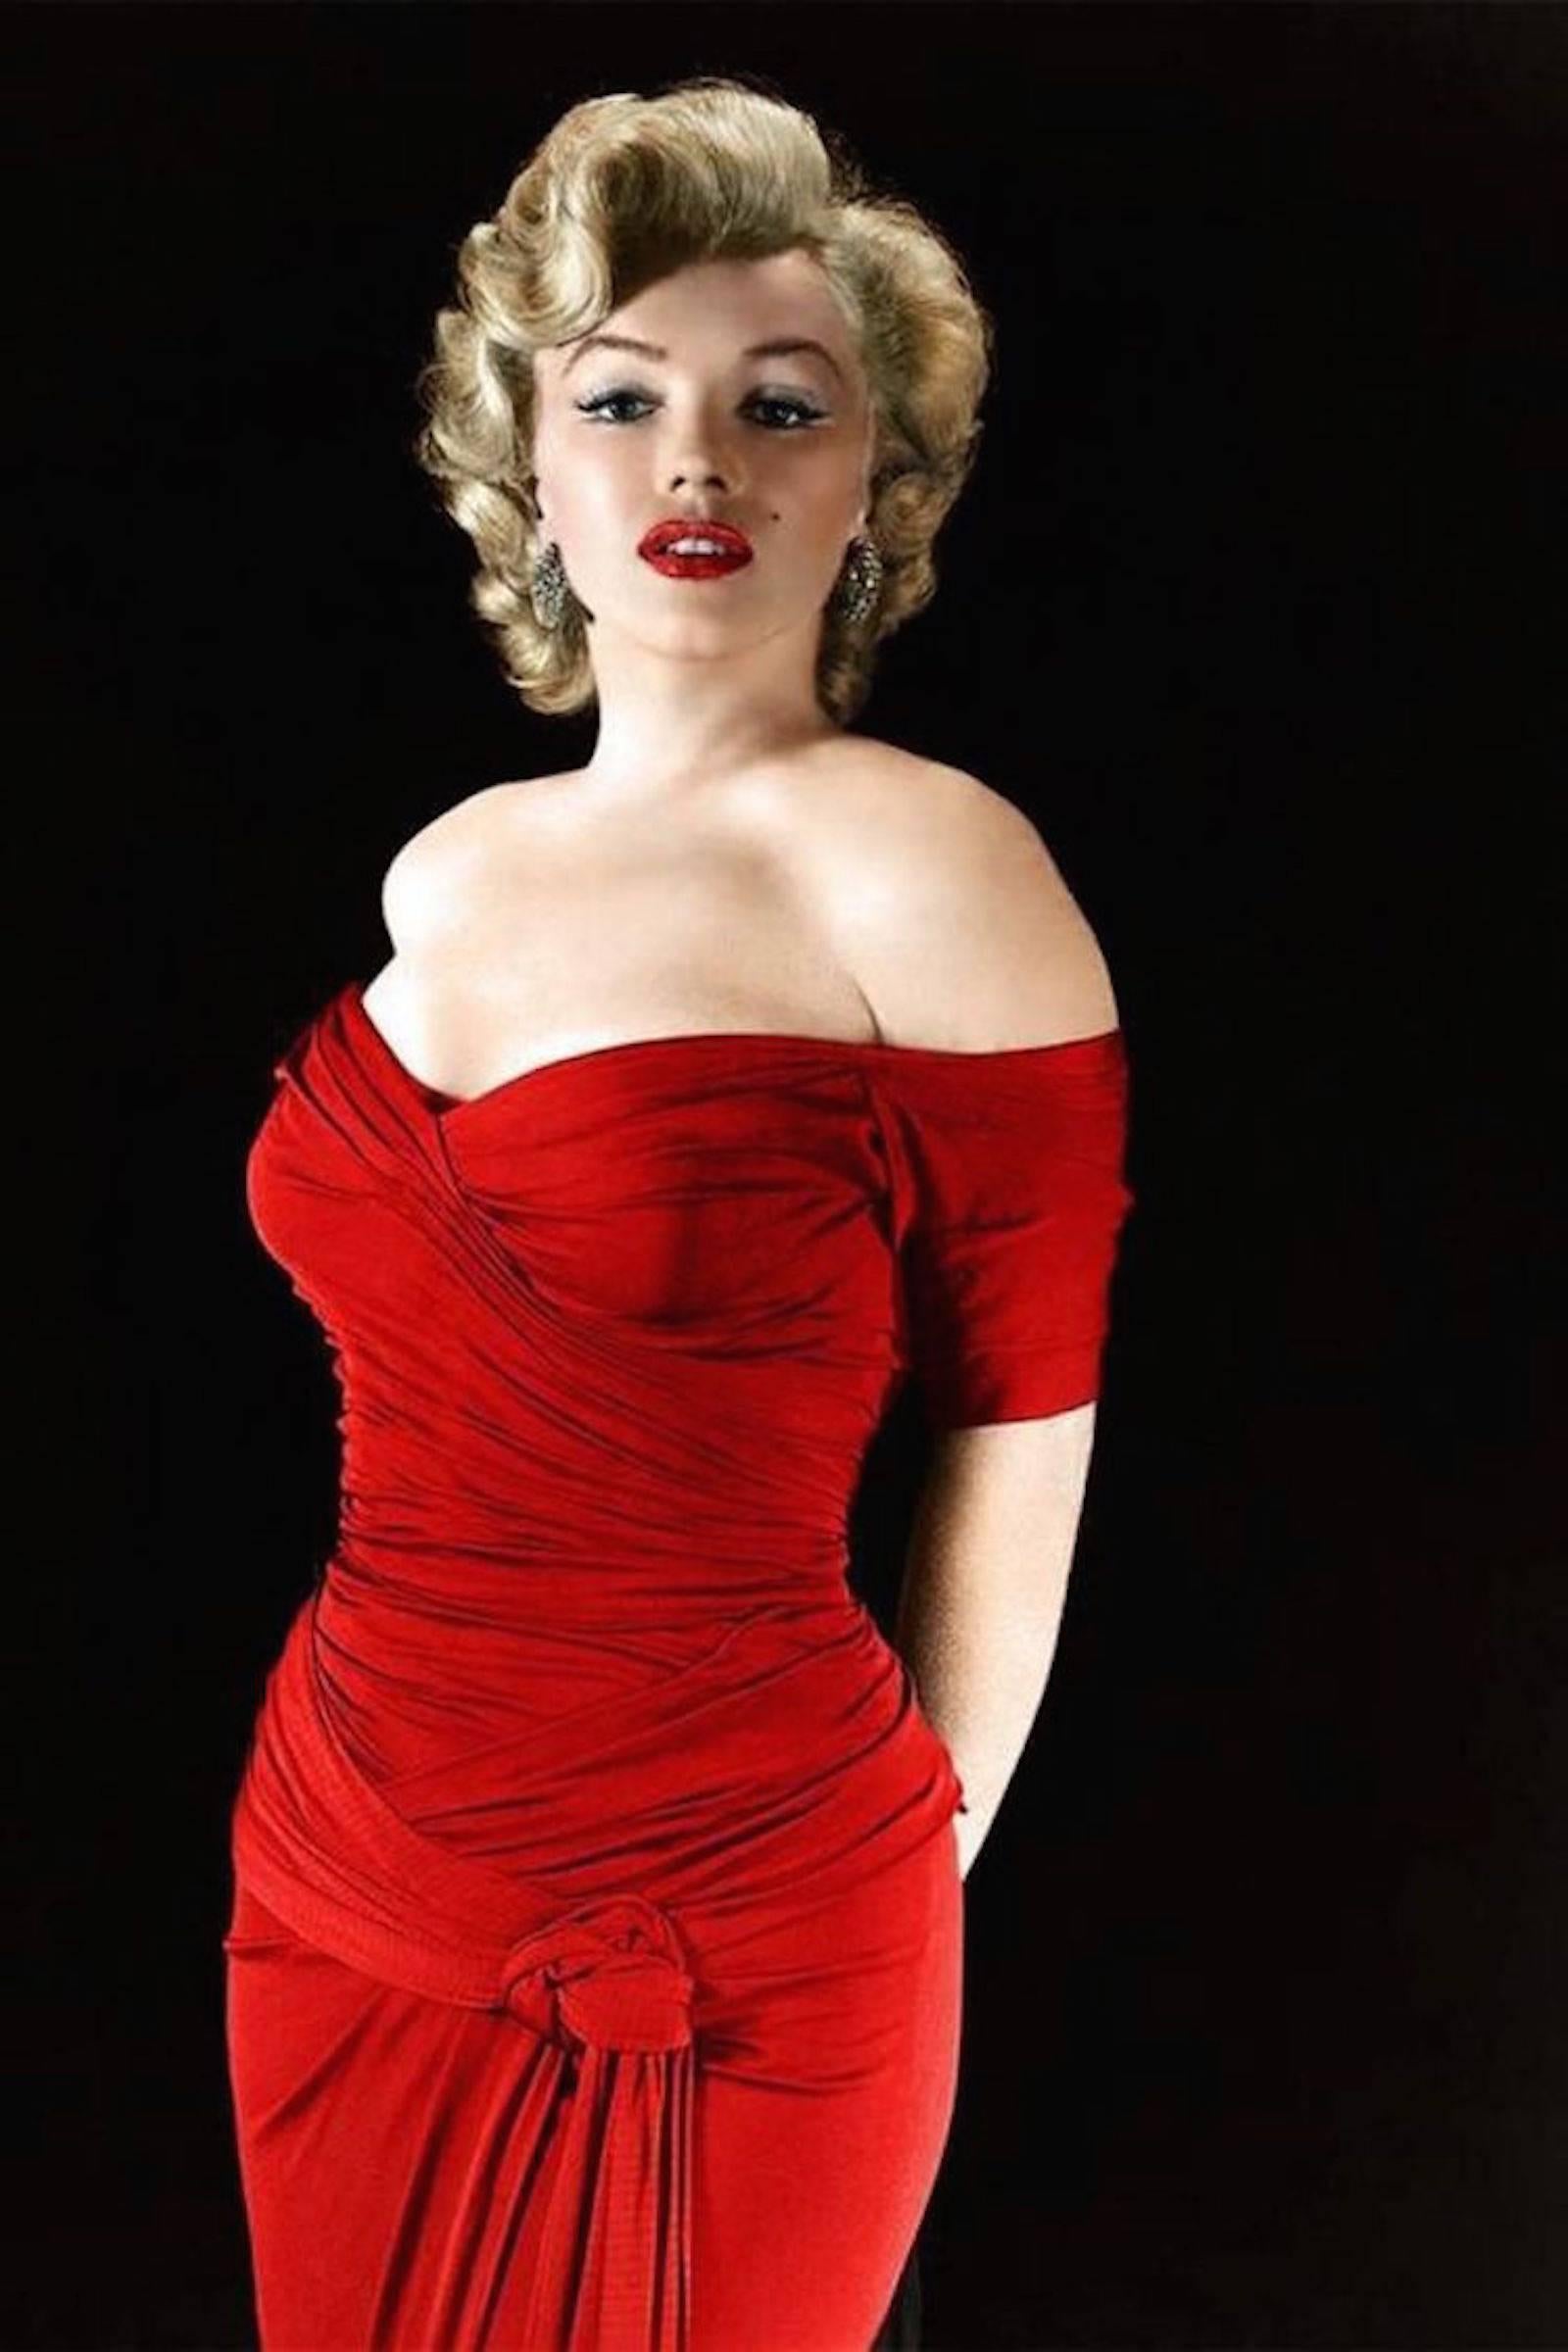 1950s Ceil Chapman iconic red silk chiffon dress.  Just like the one Marilyn Monroe wore.
34